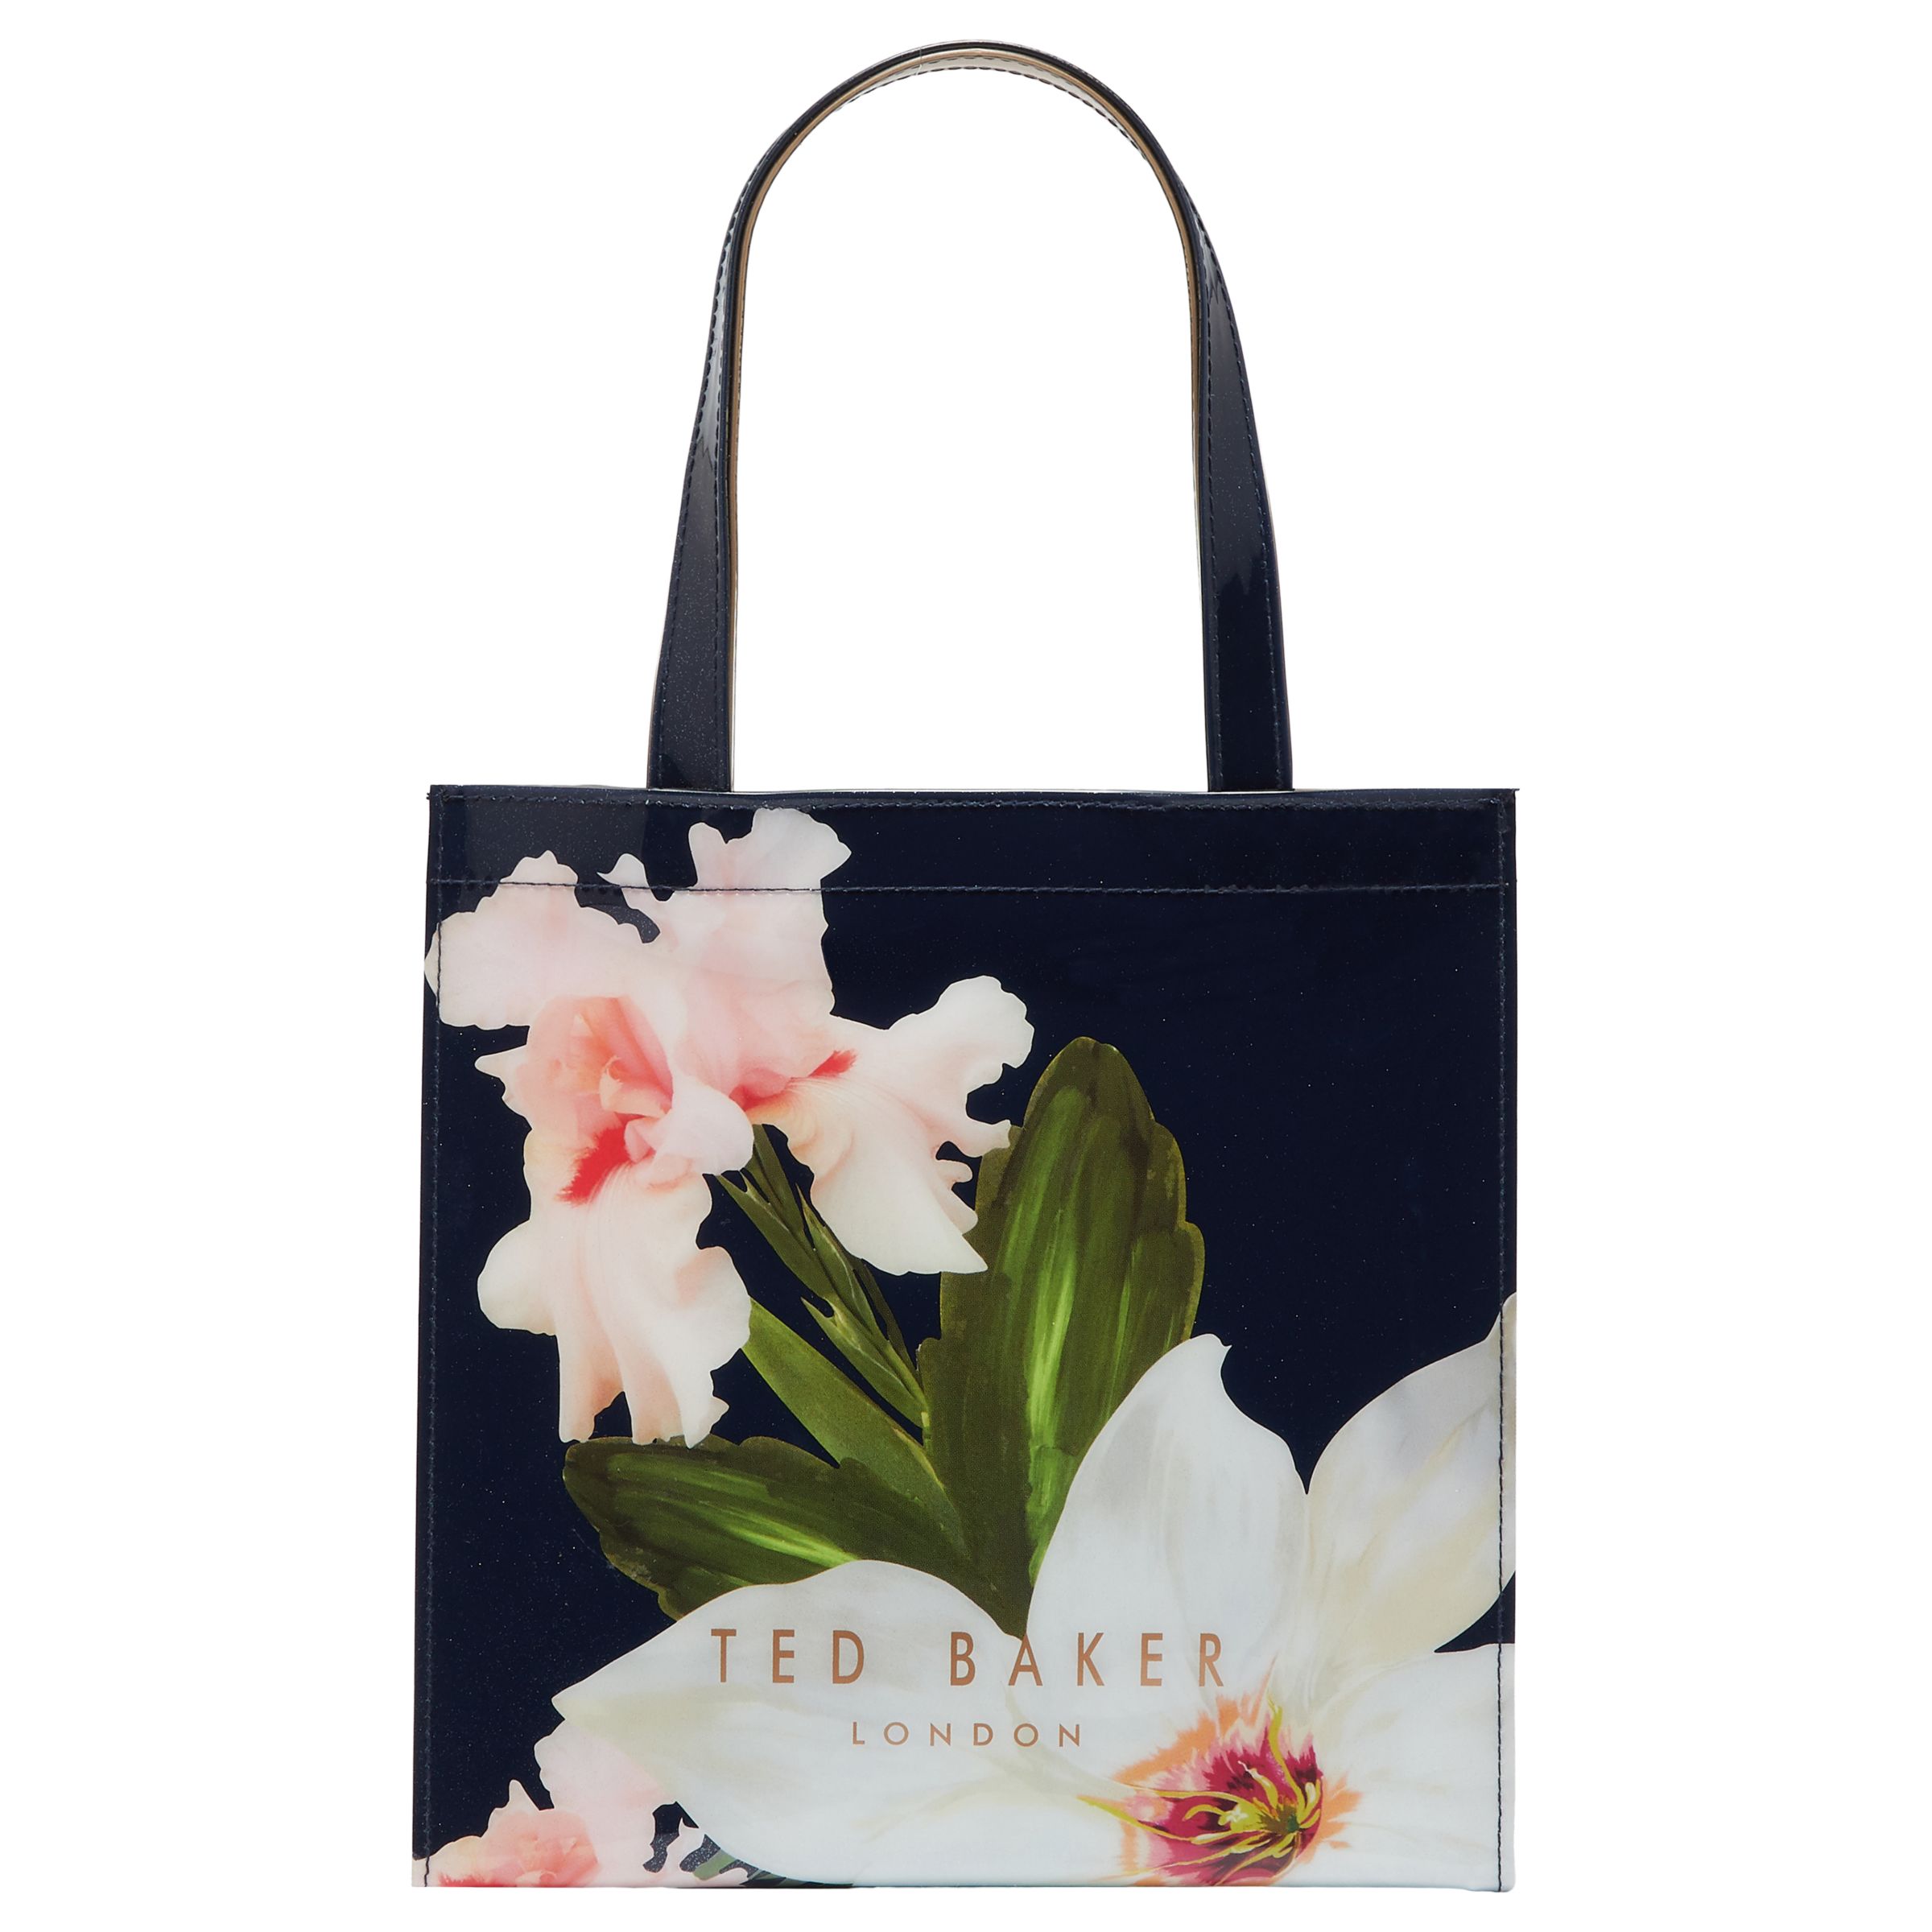 ted baker small icon bag size